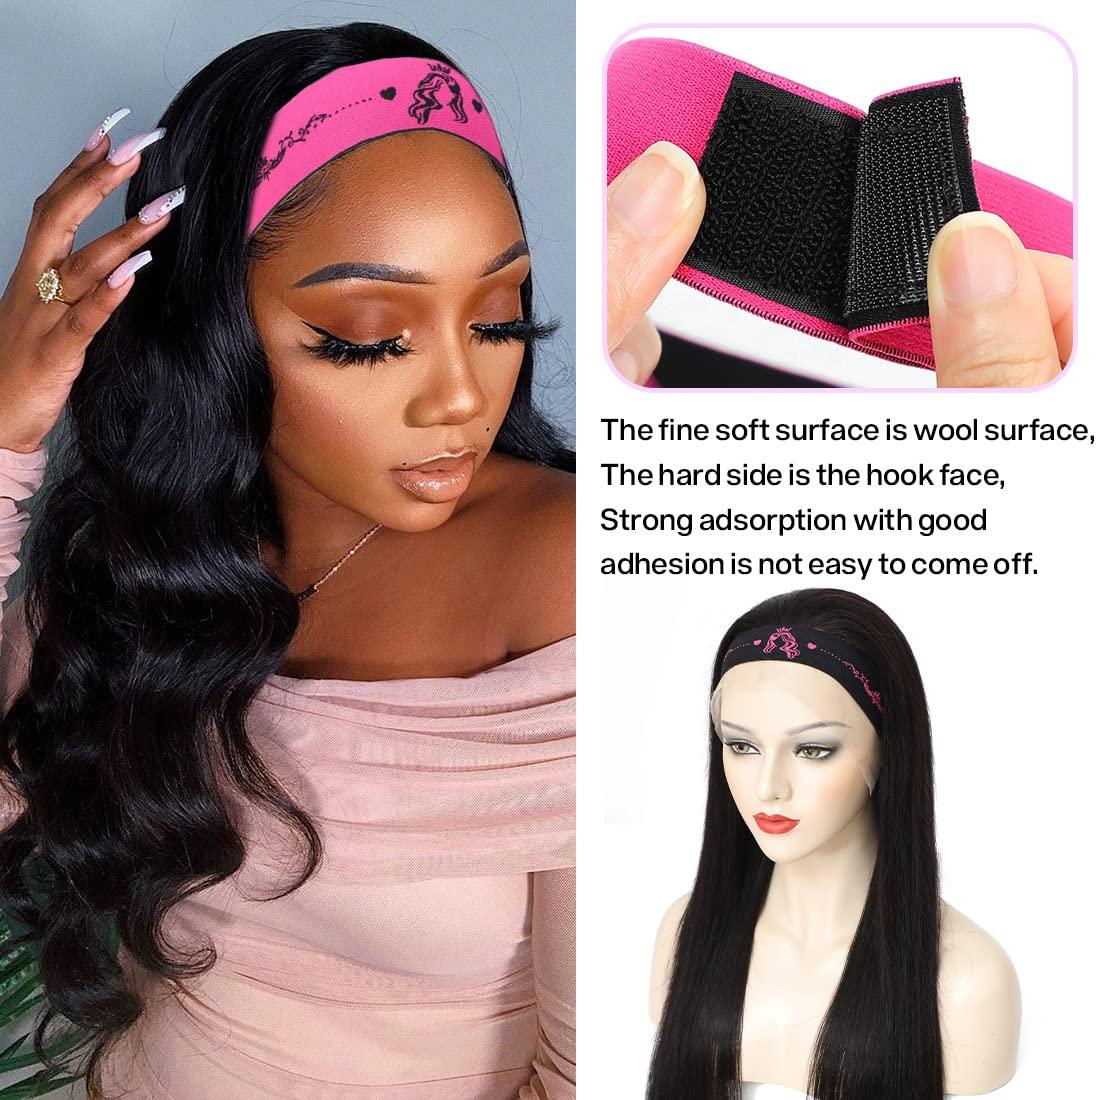 Wig Elastic Band for Melting Lace - 4 PCS edge band for wigs Lace Melting  Bands for Keeping Wigs in Place wig laying band Wig Elastic Band lace band  for wigs edges